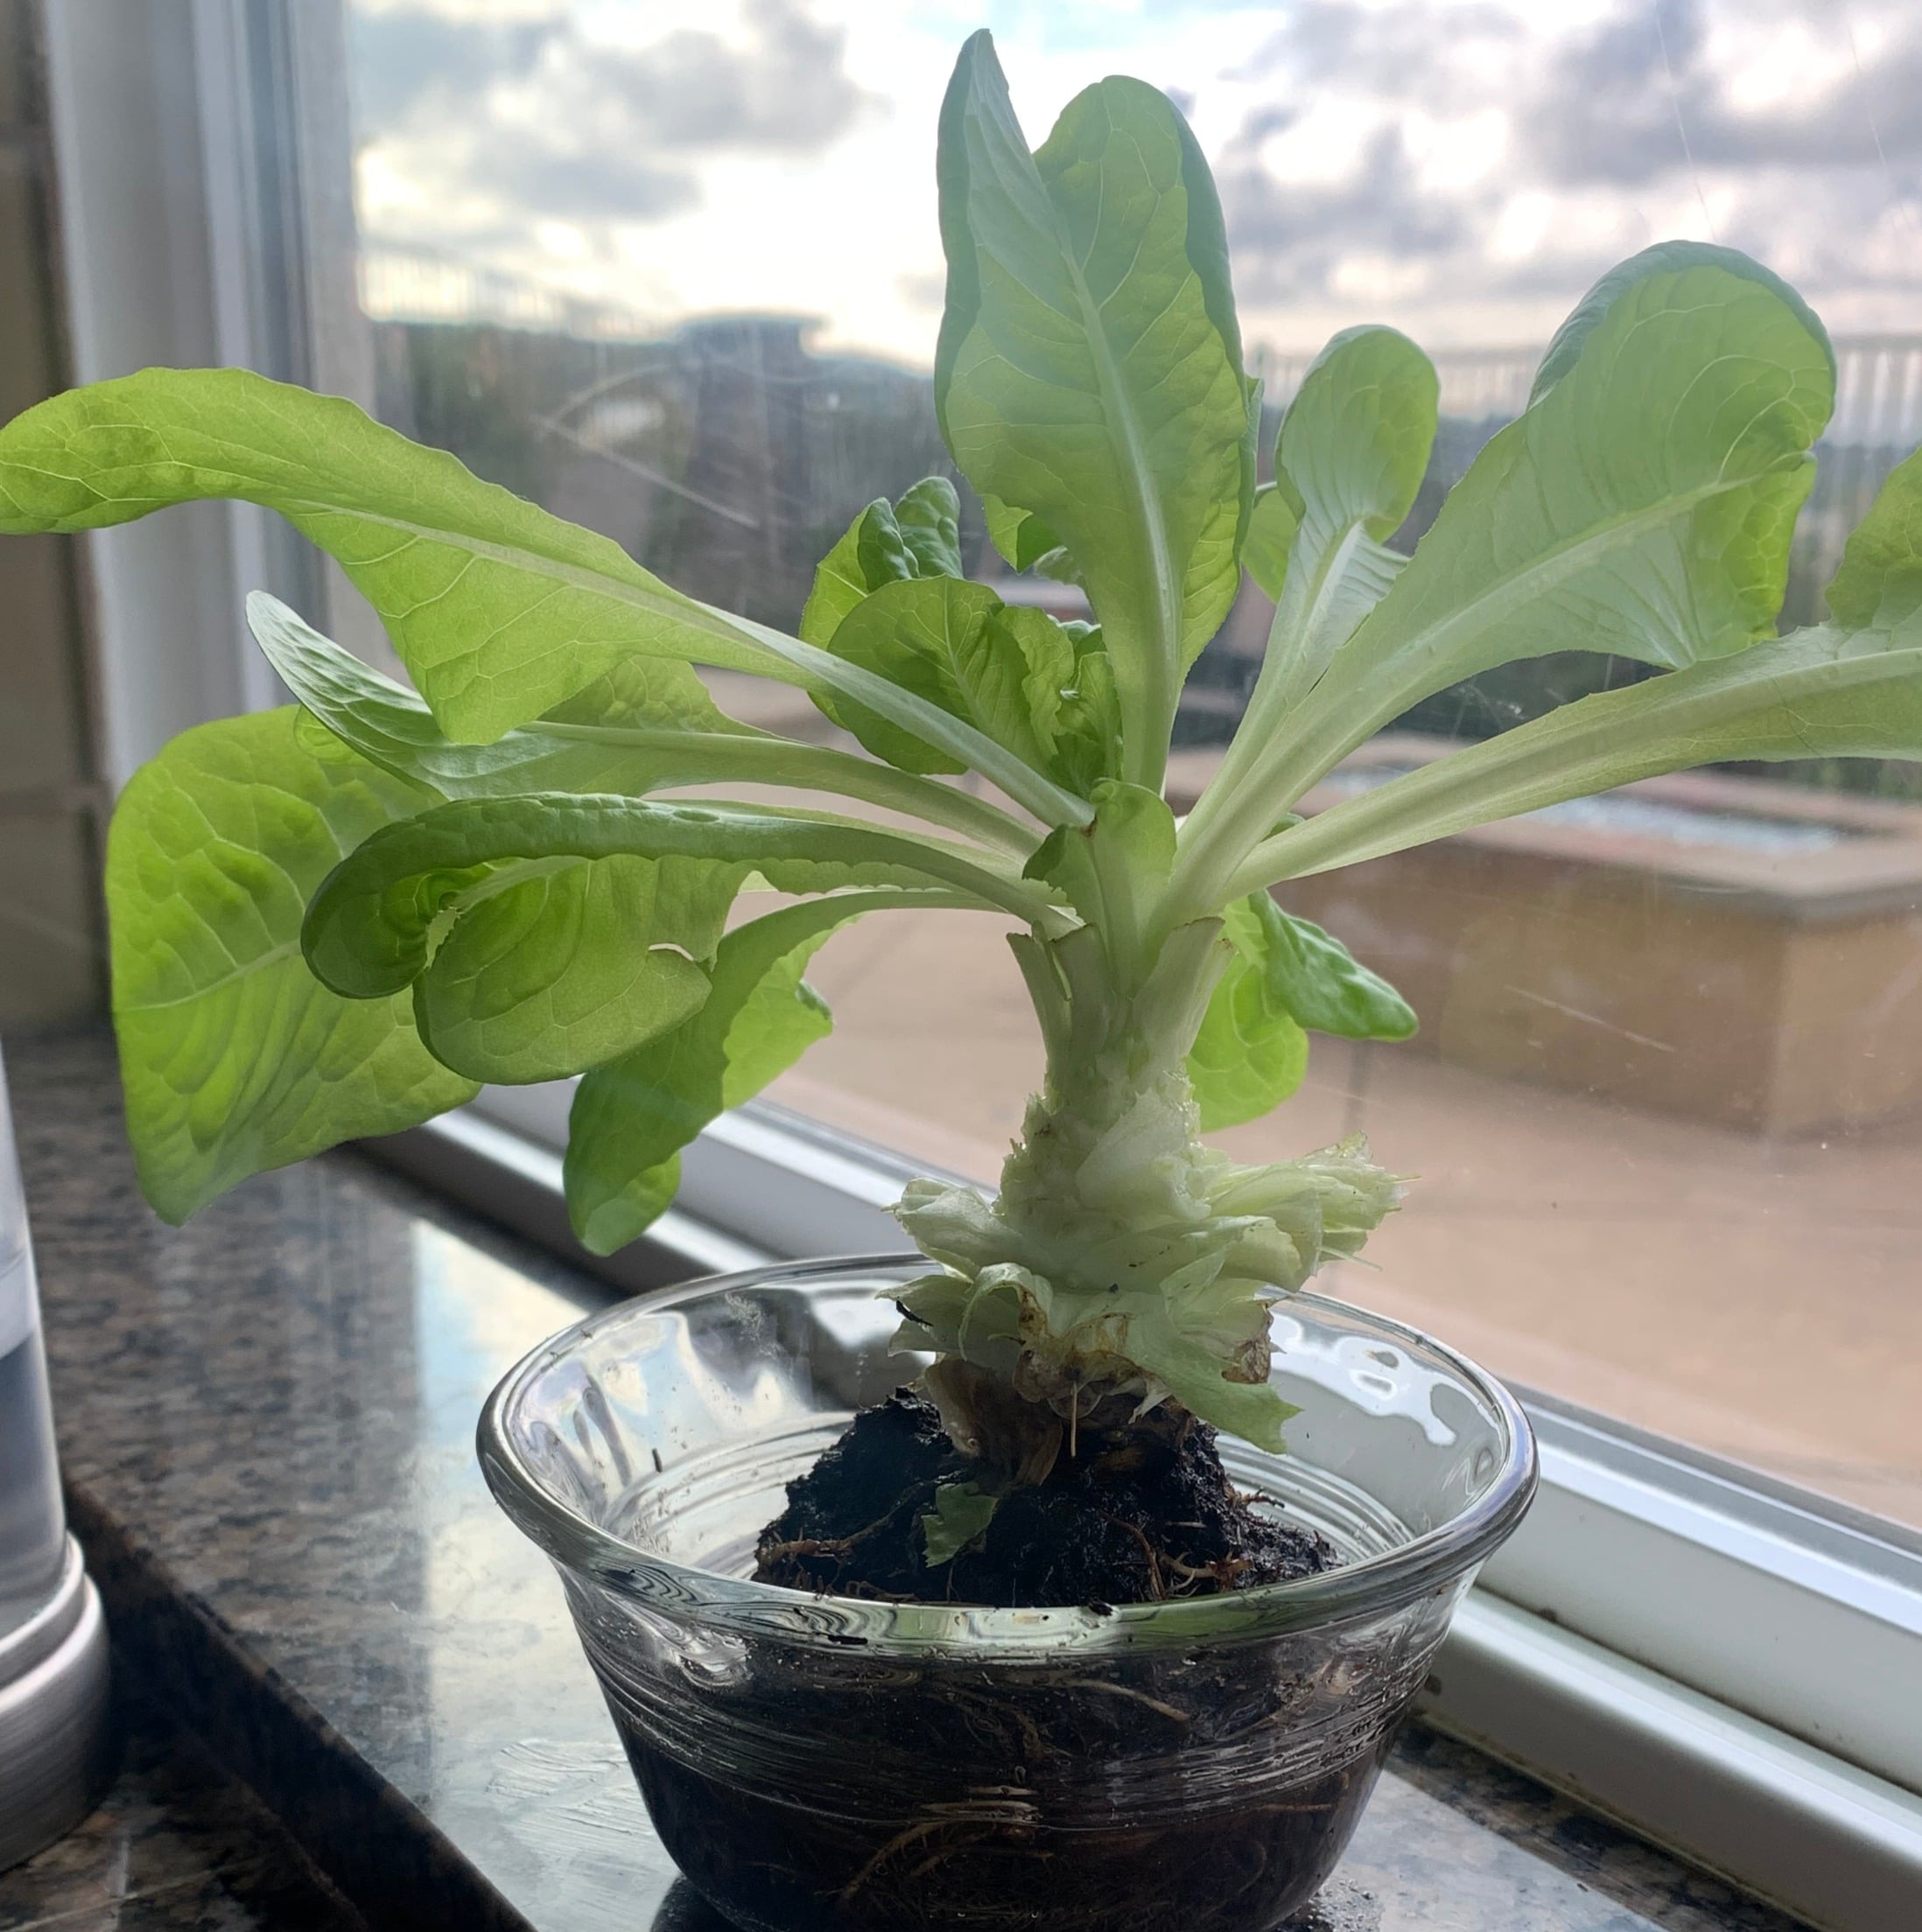 Sprouting lettuce in a window